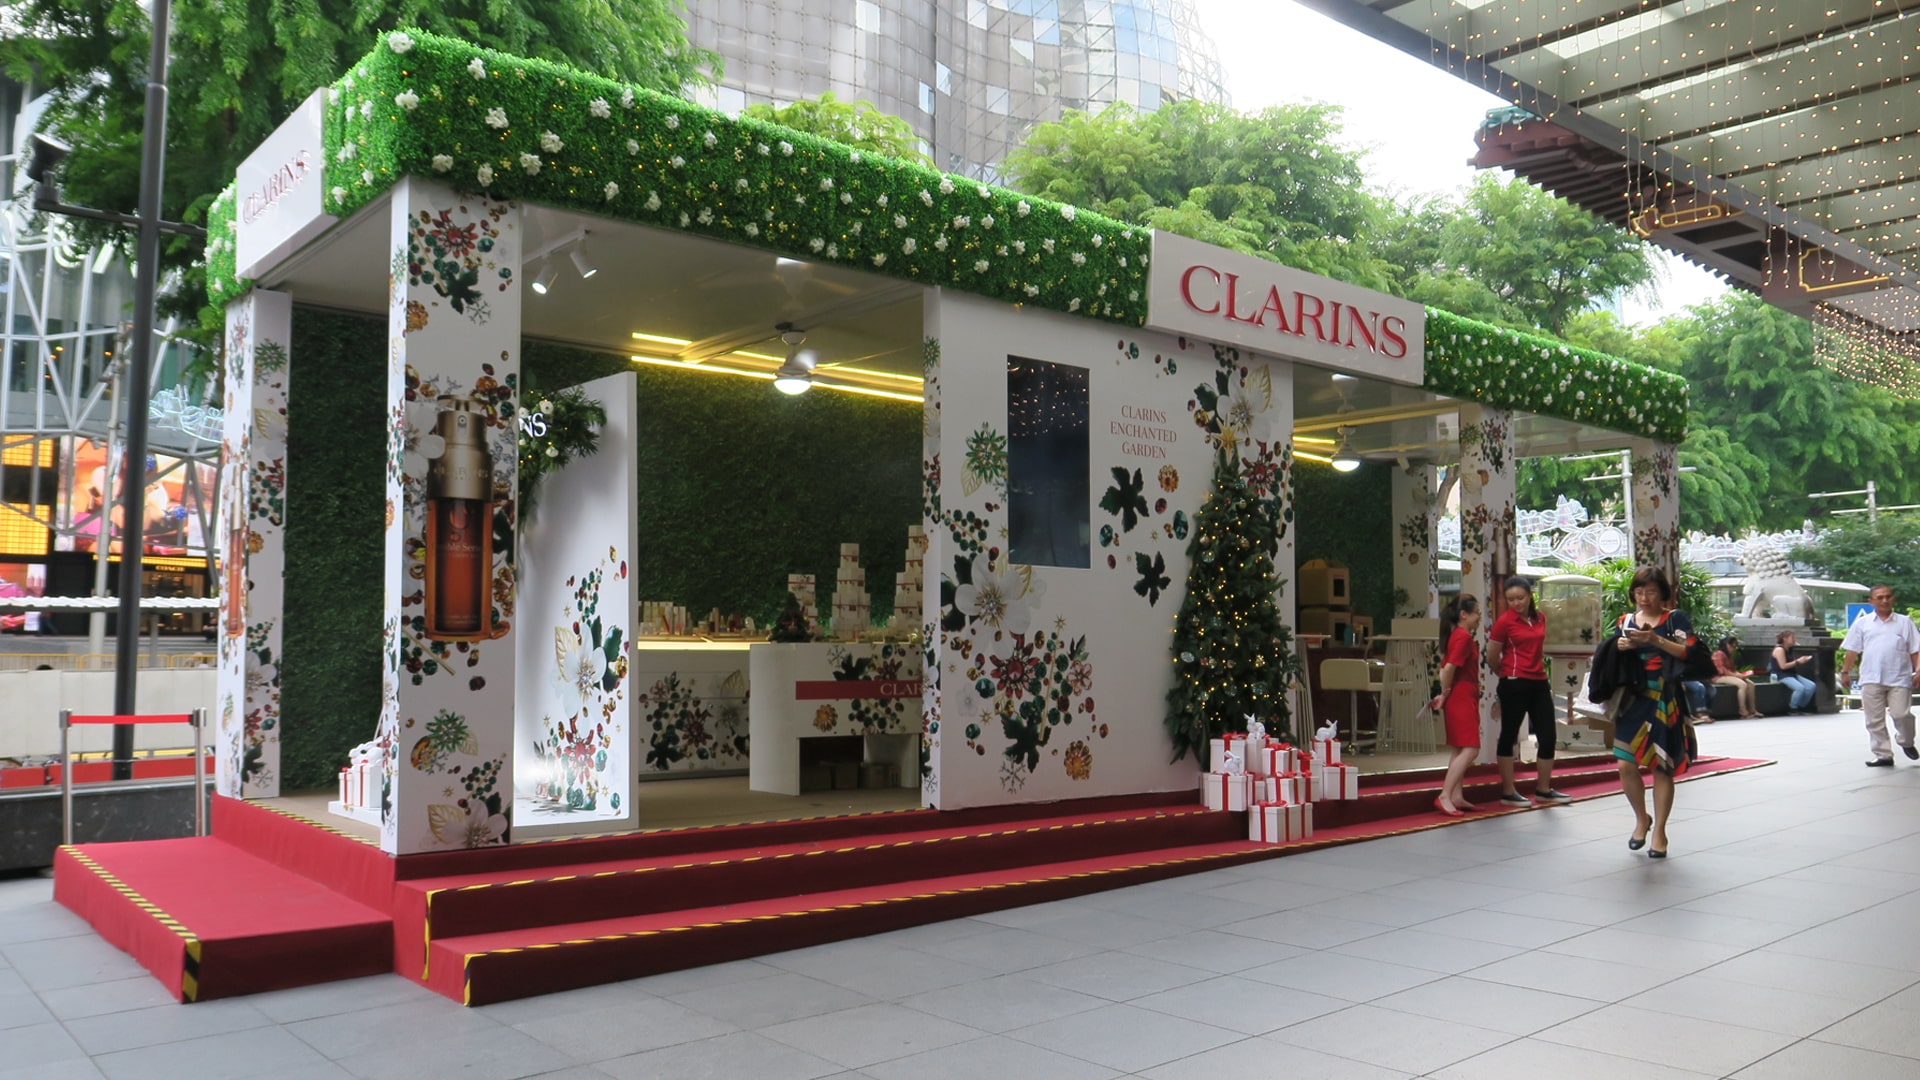 tsc_opt-images_tubelar-system_clarins-pop-up-beauty-store-1920x1080-04-min